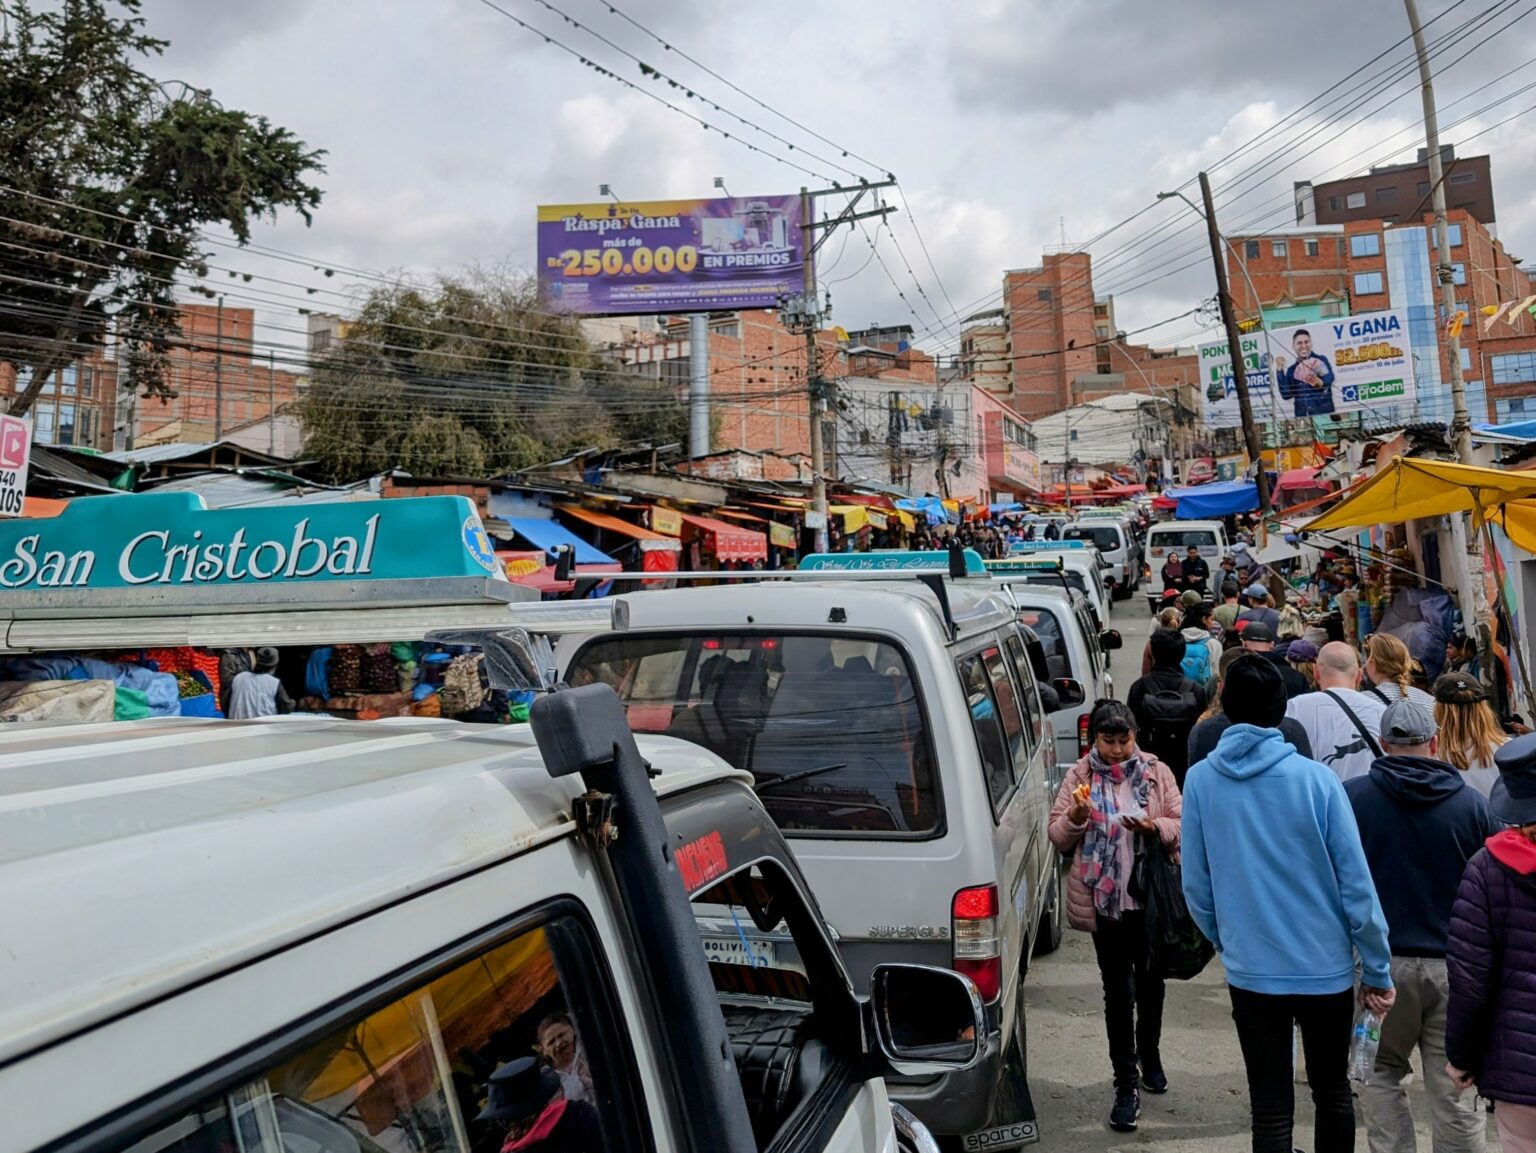 Buses and cars and people flowing through the city of La Paz, Bolivia